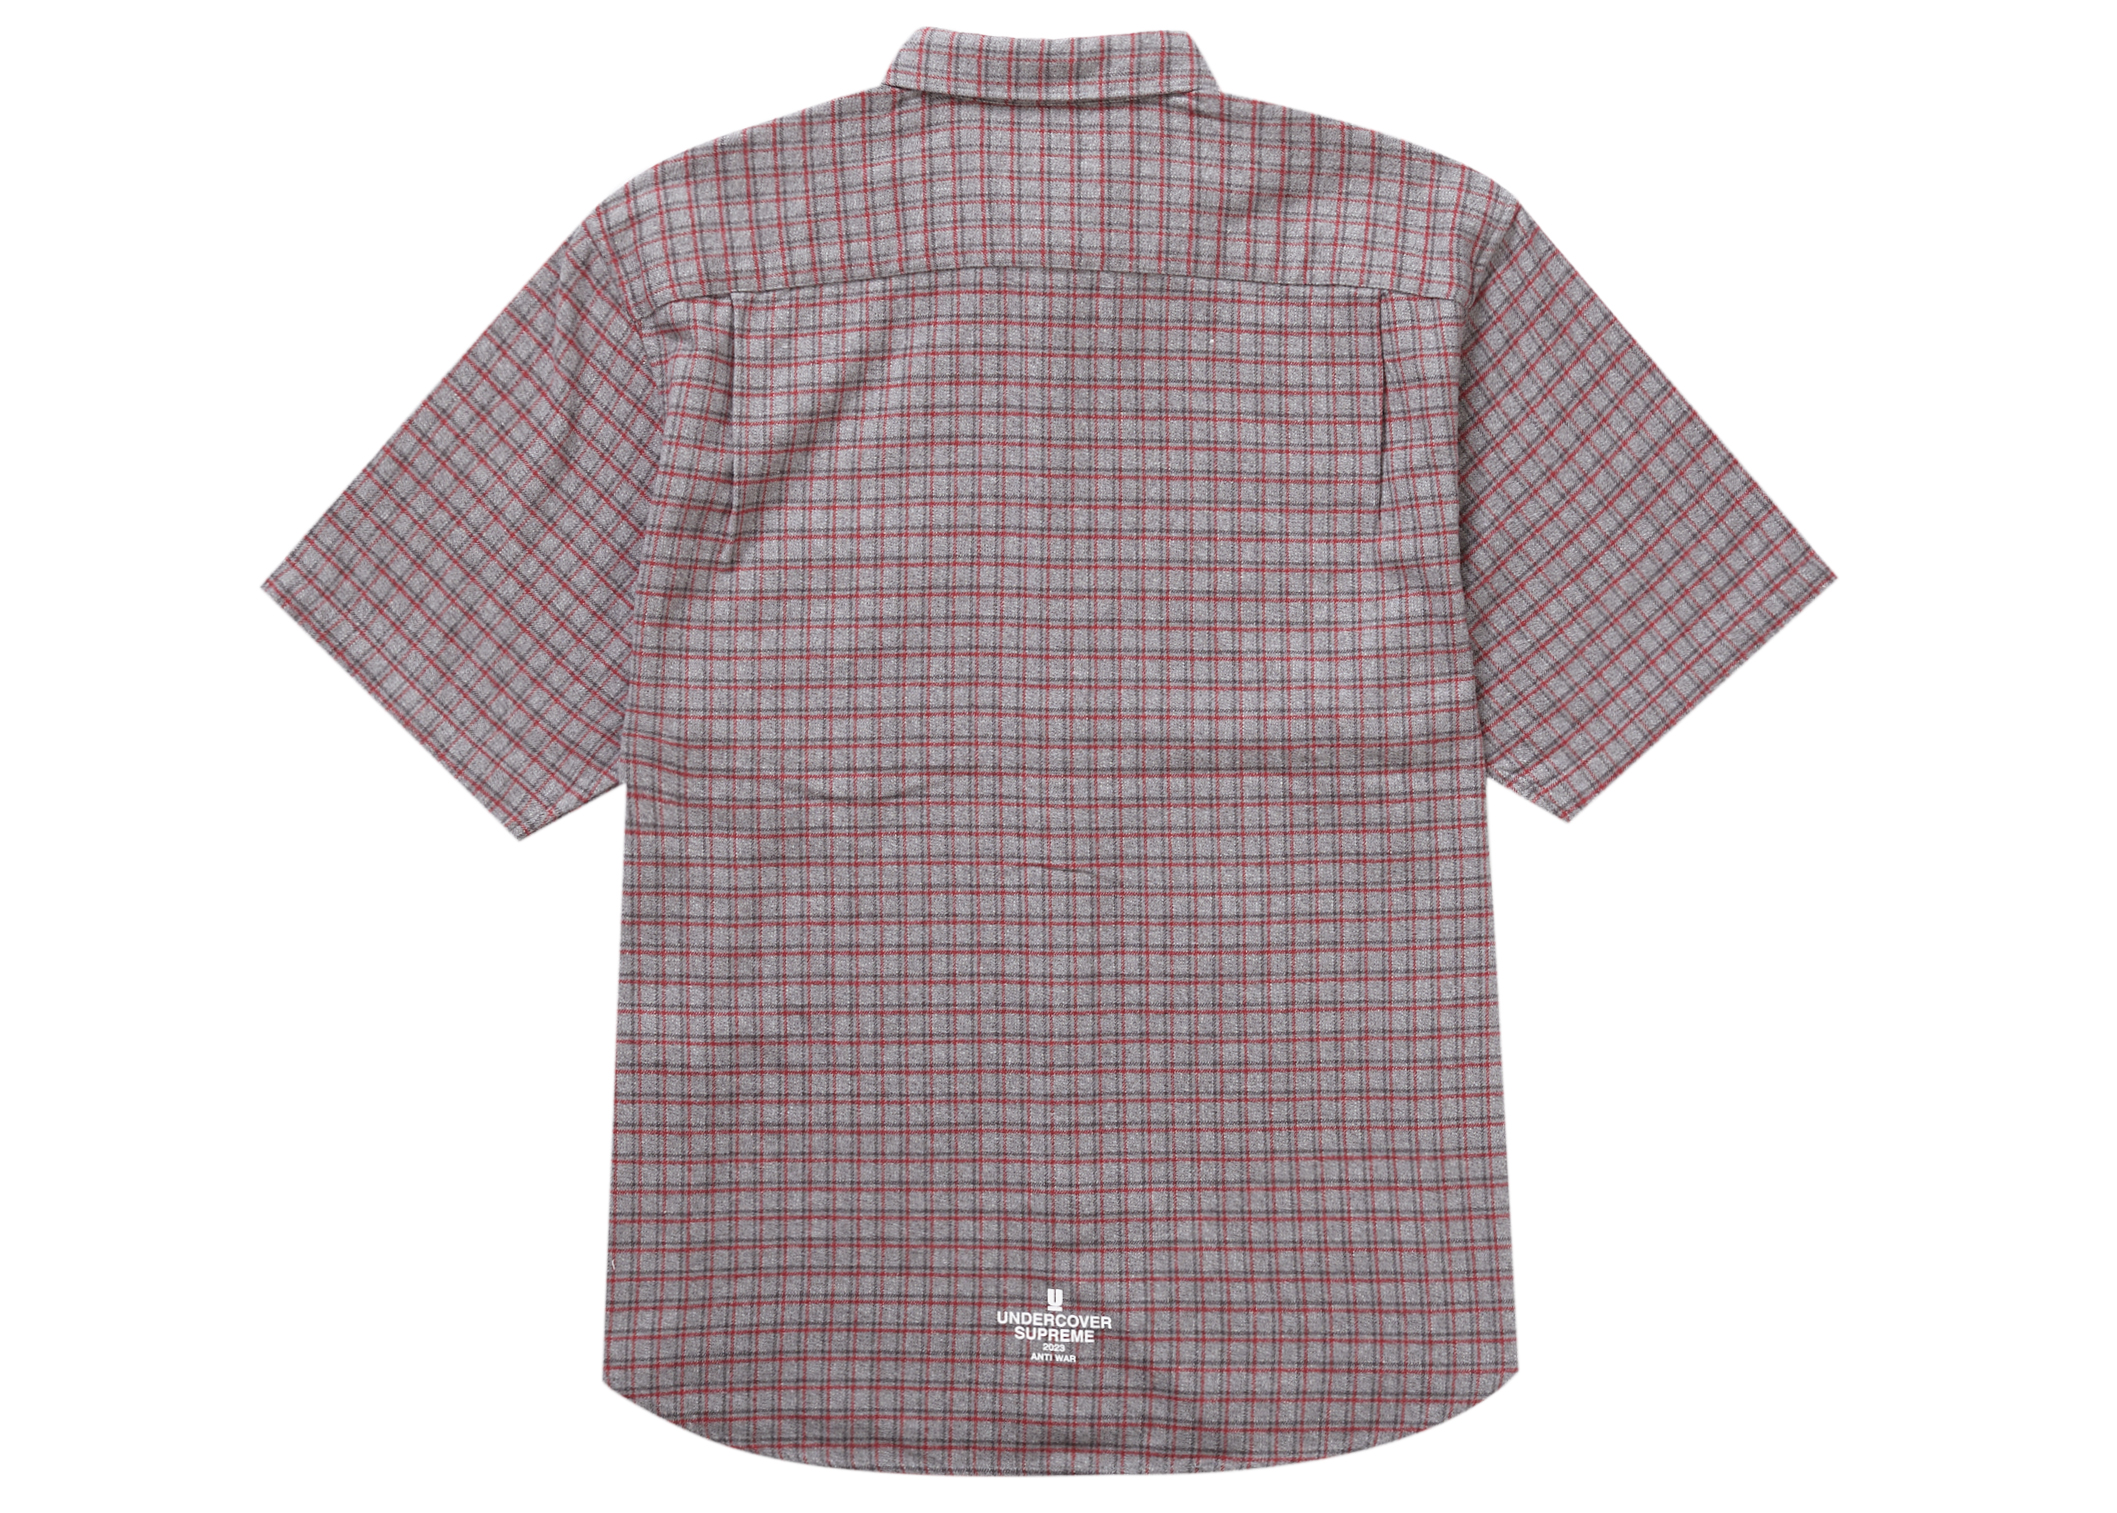 Supreme UNDERCOVER S/S Flannel Shirt Grey Plaid Men's - SS23 - GB